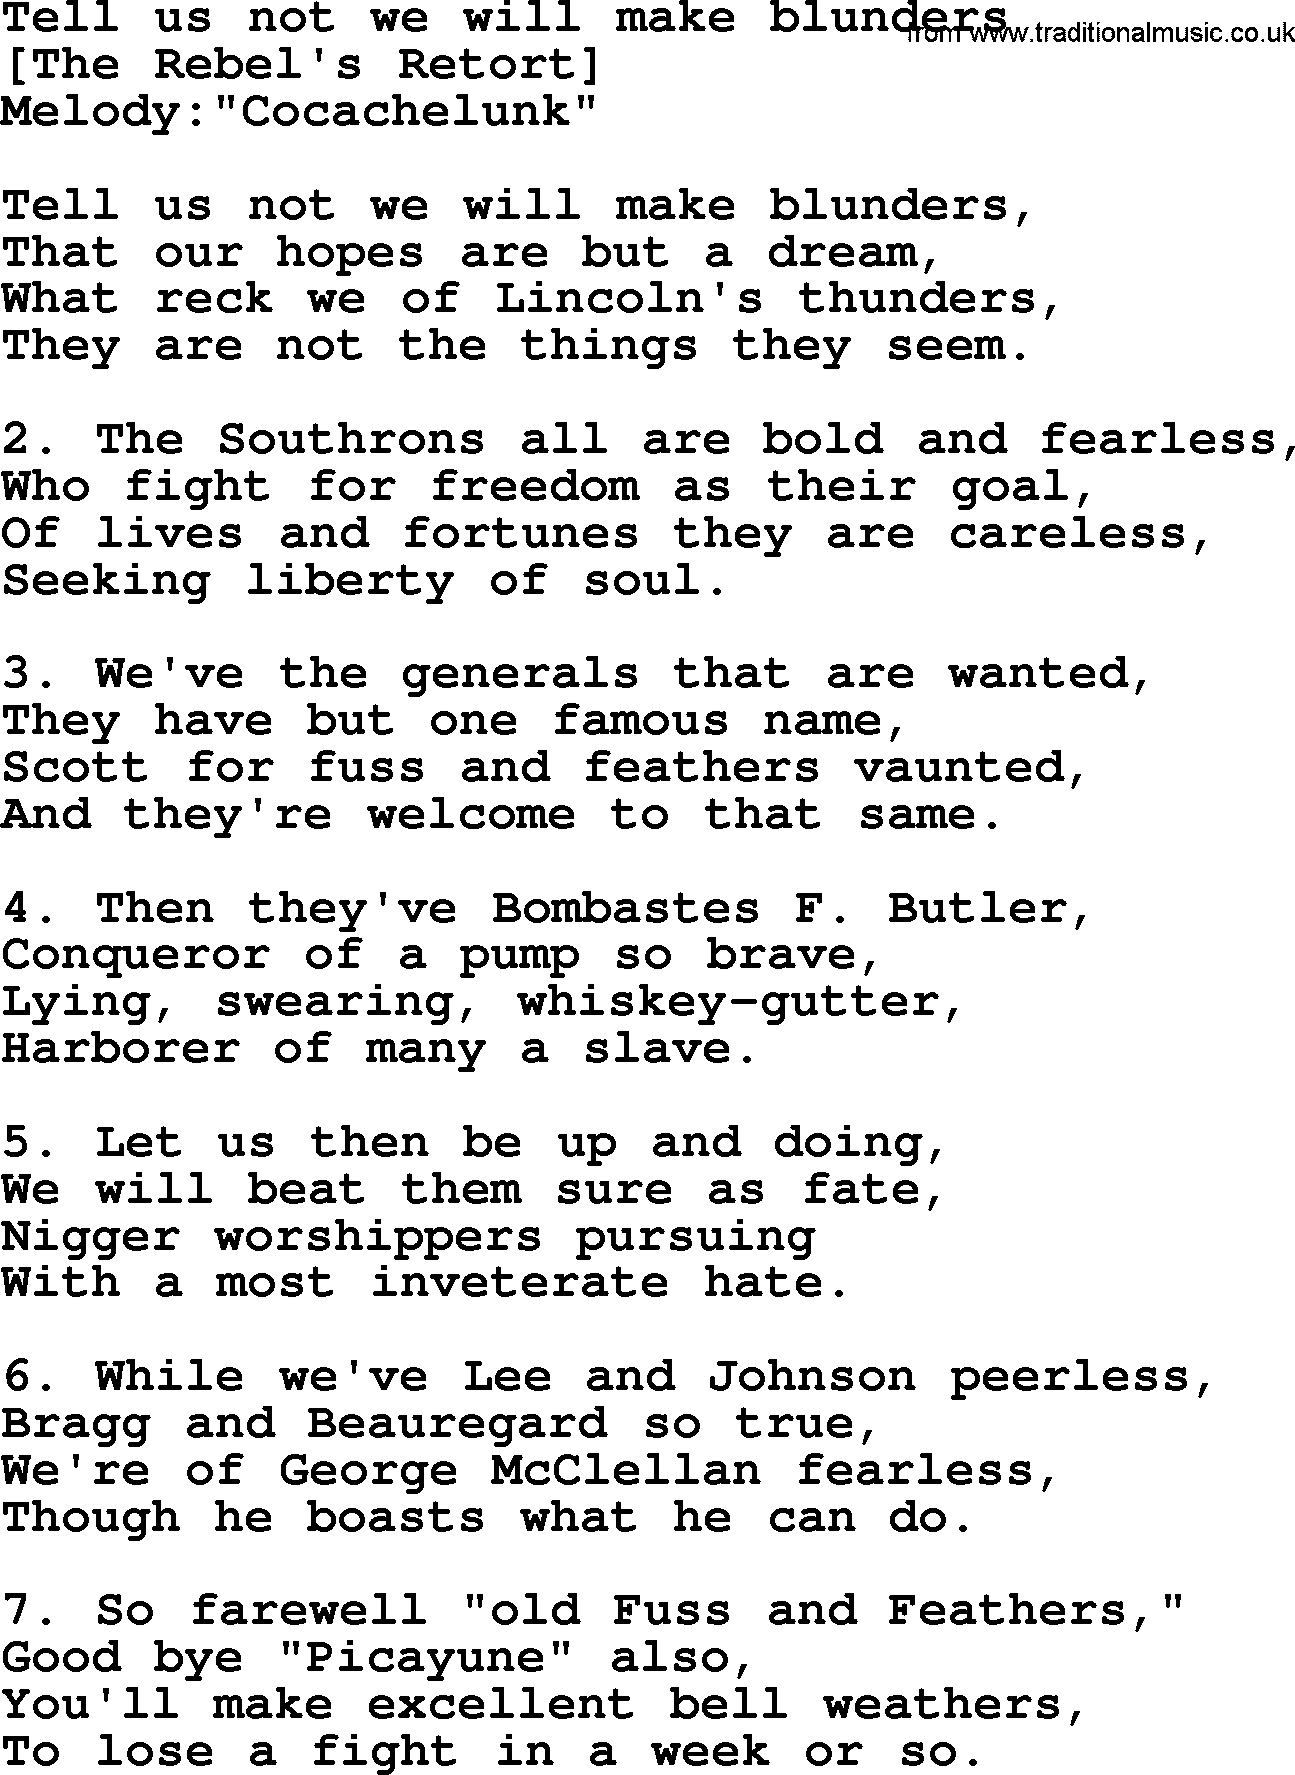 Old American Song: Tell Us Not We Will Make Blunders, lyrics